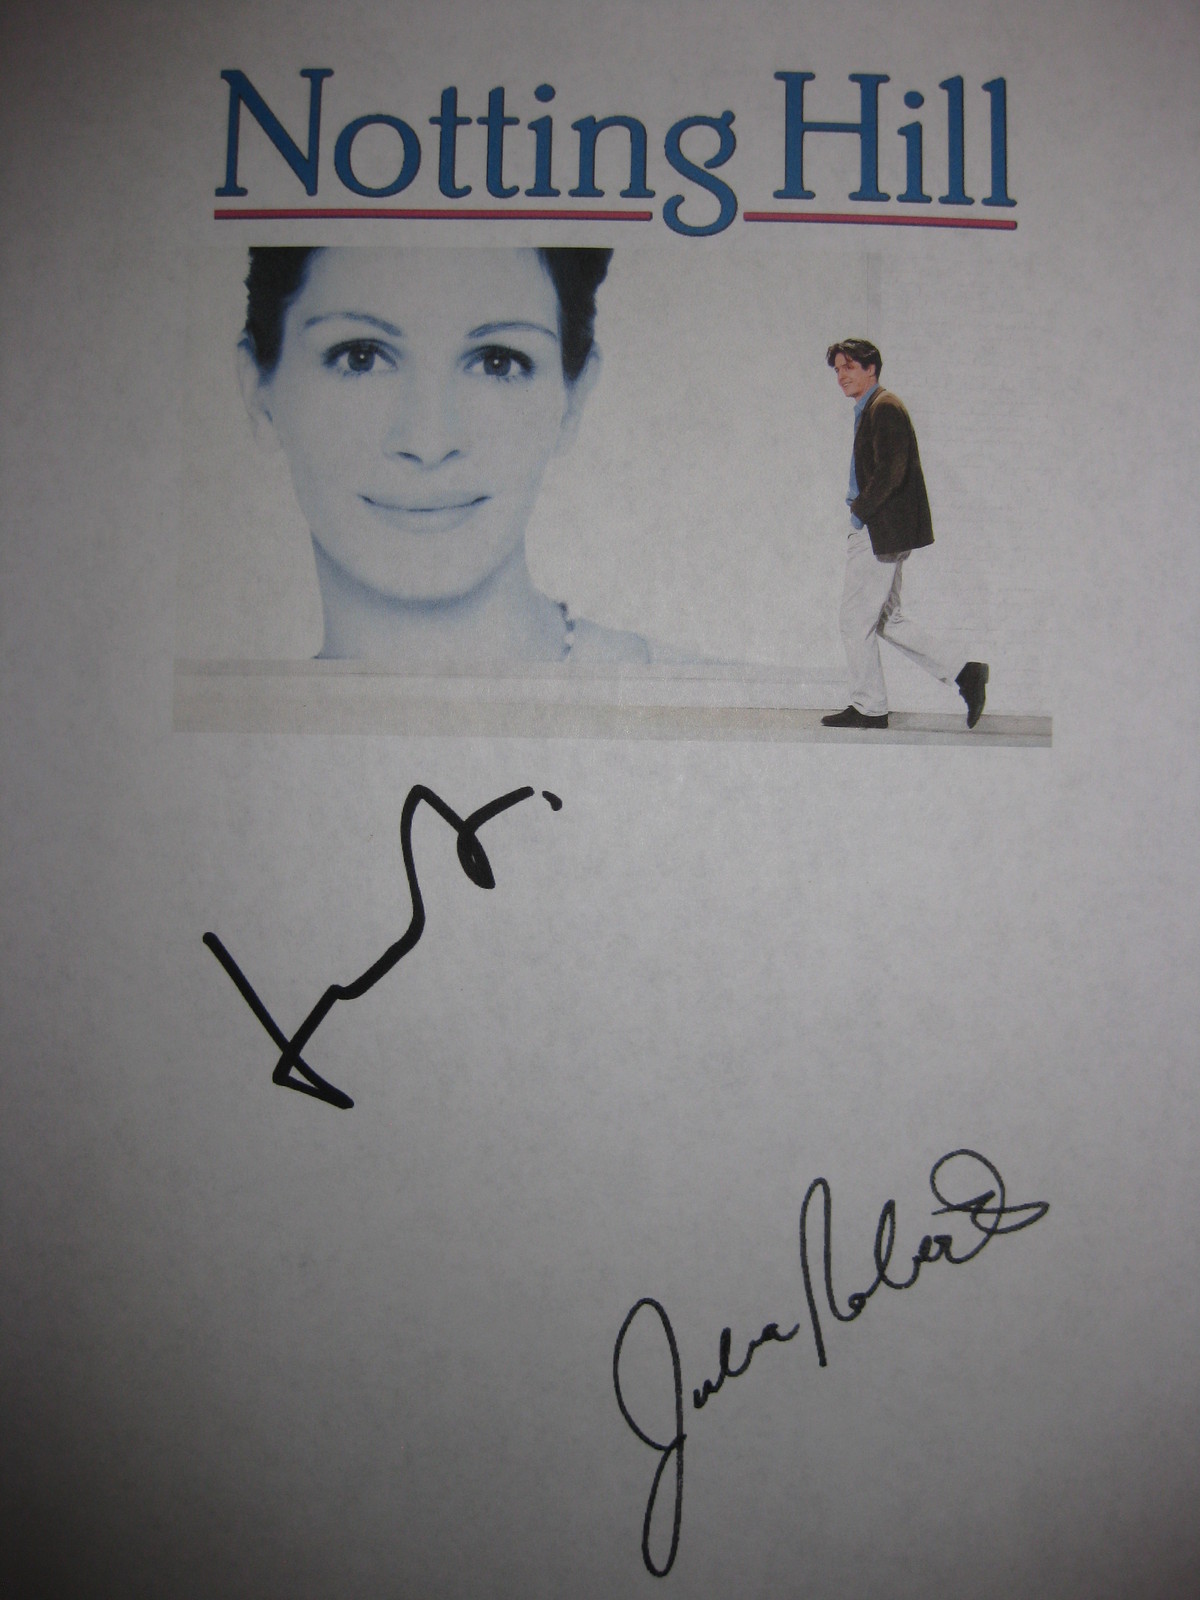 Notting Hill Julia Roberts Signed Movie Poster 